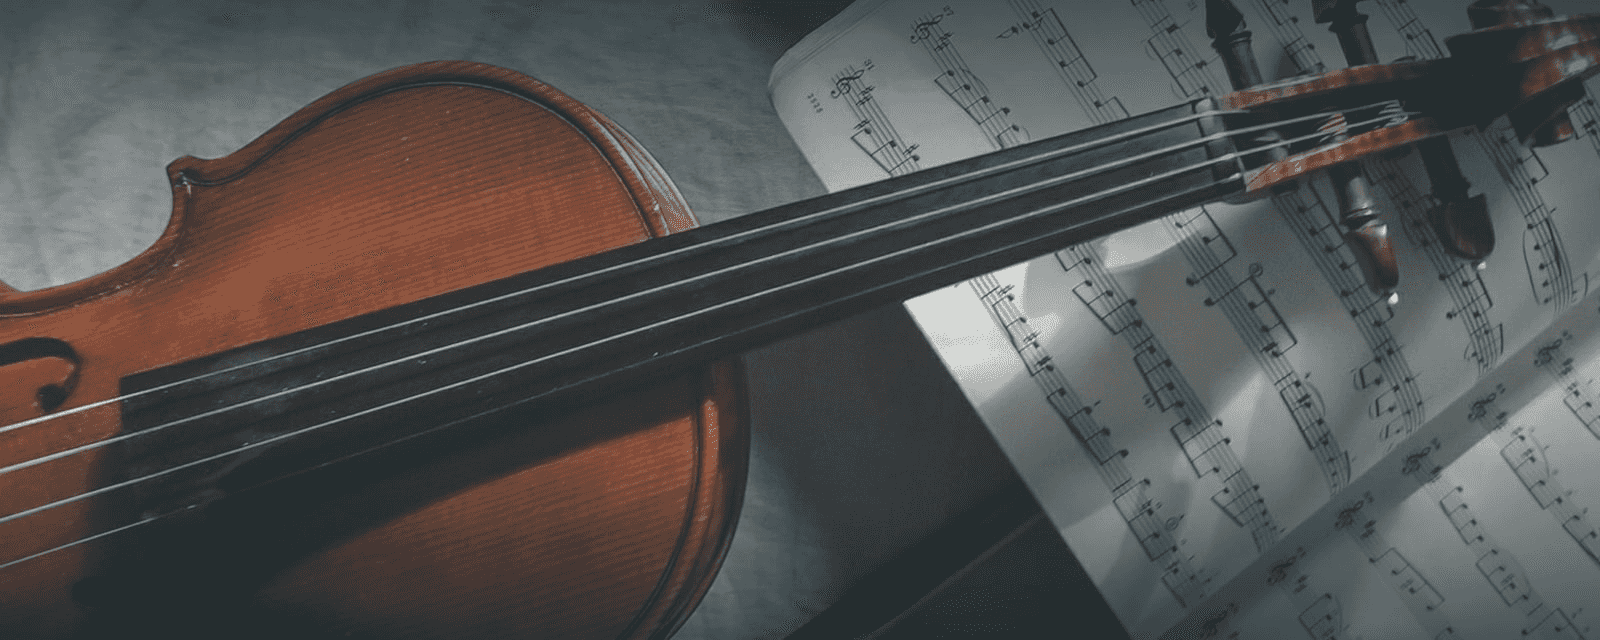 Learn how to play violin or improve your skills 